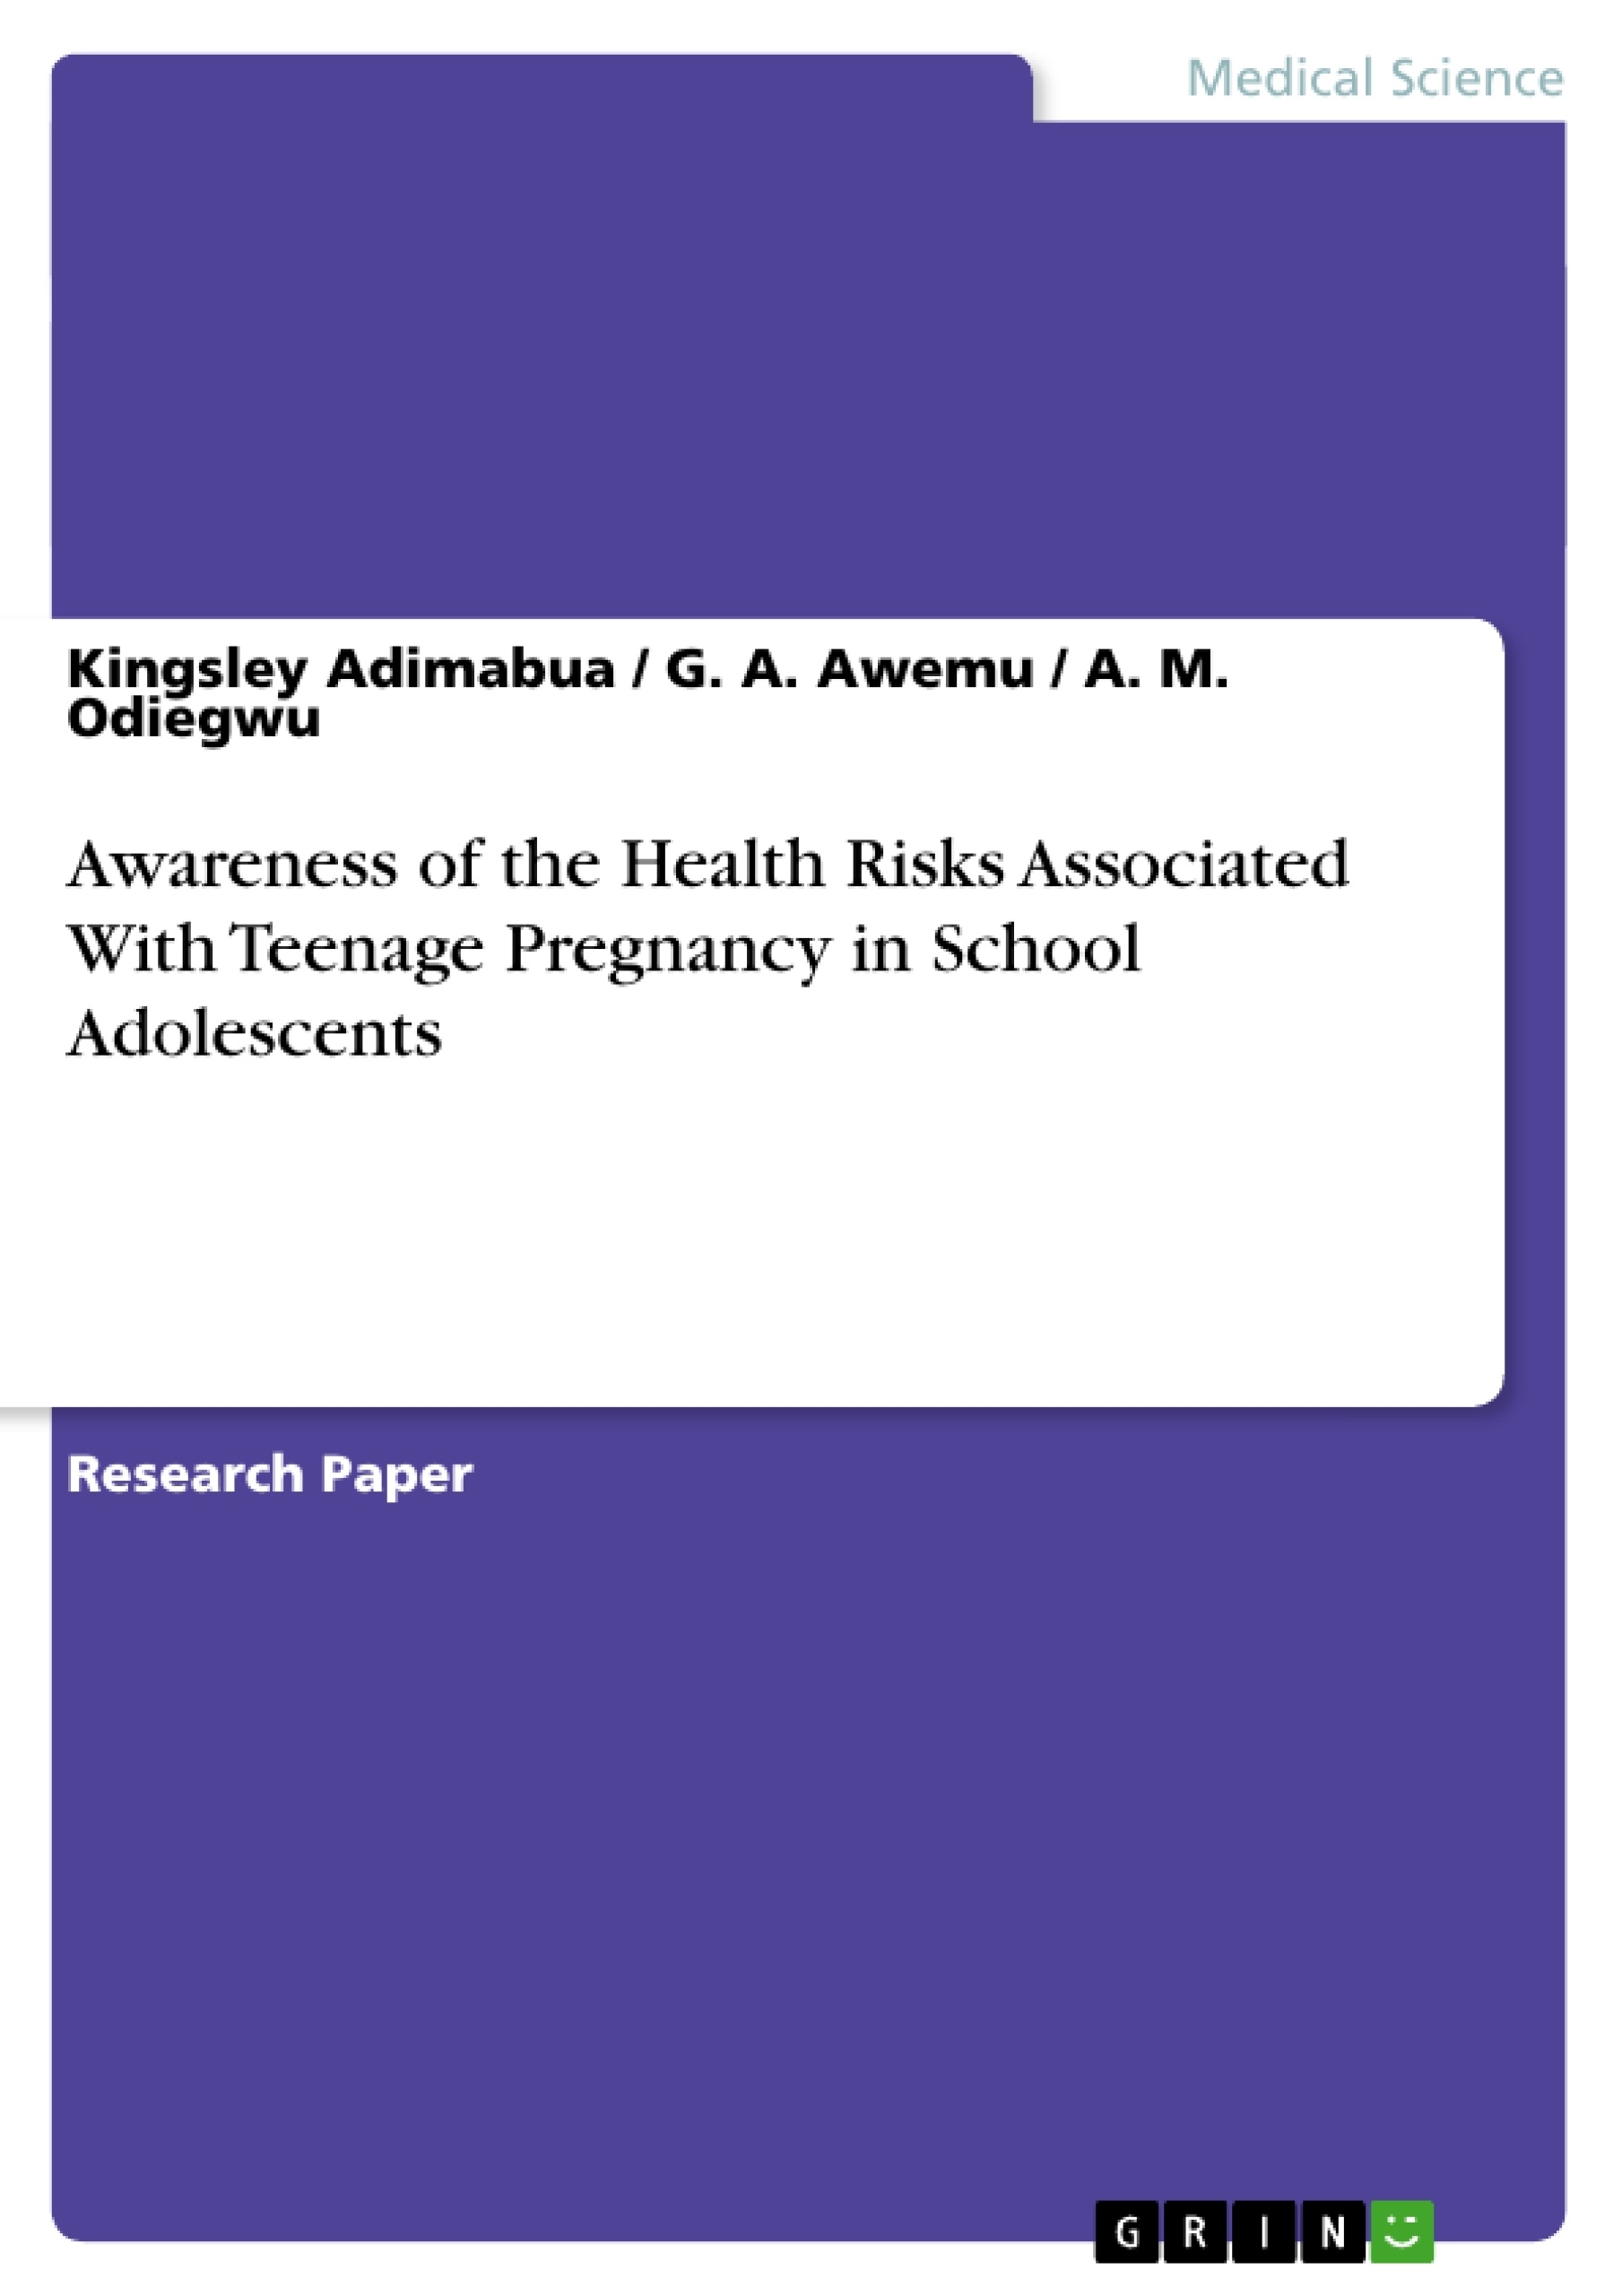 Title: Awareness of the Health Risks Associated With Teenage Pregnancy in School Adolescents